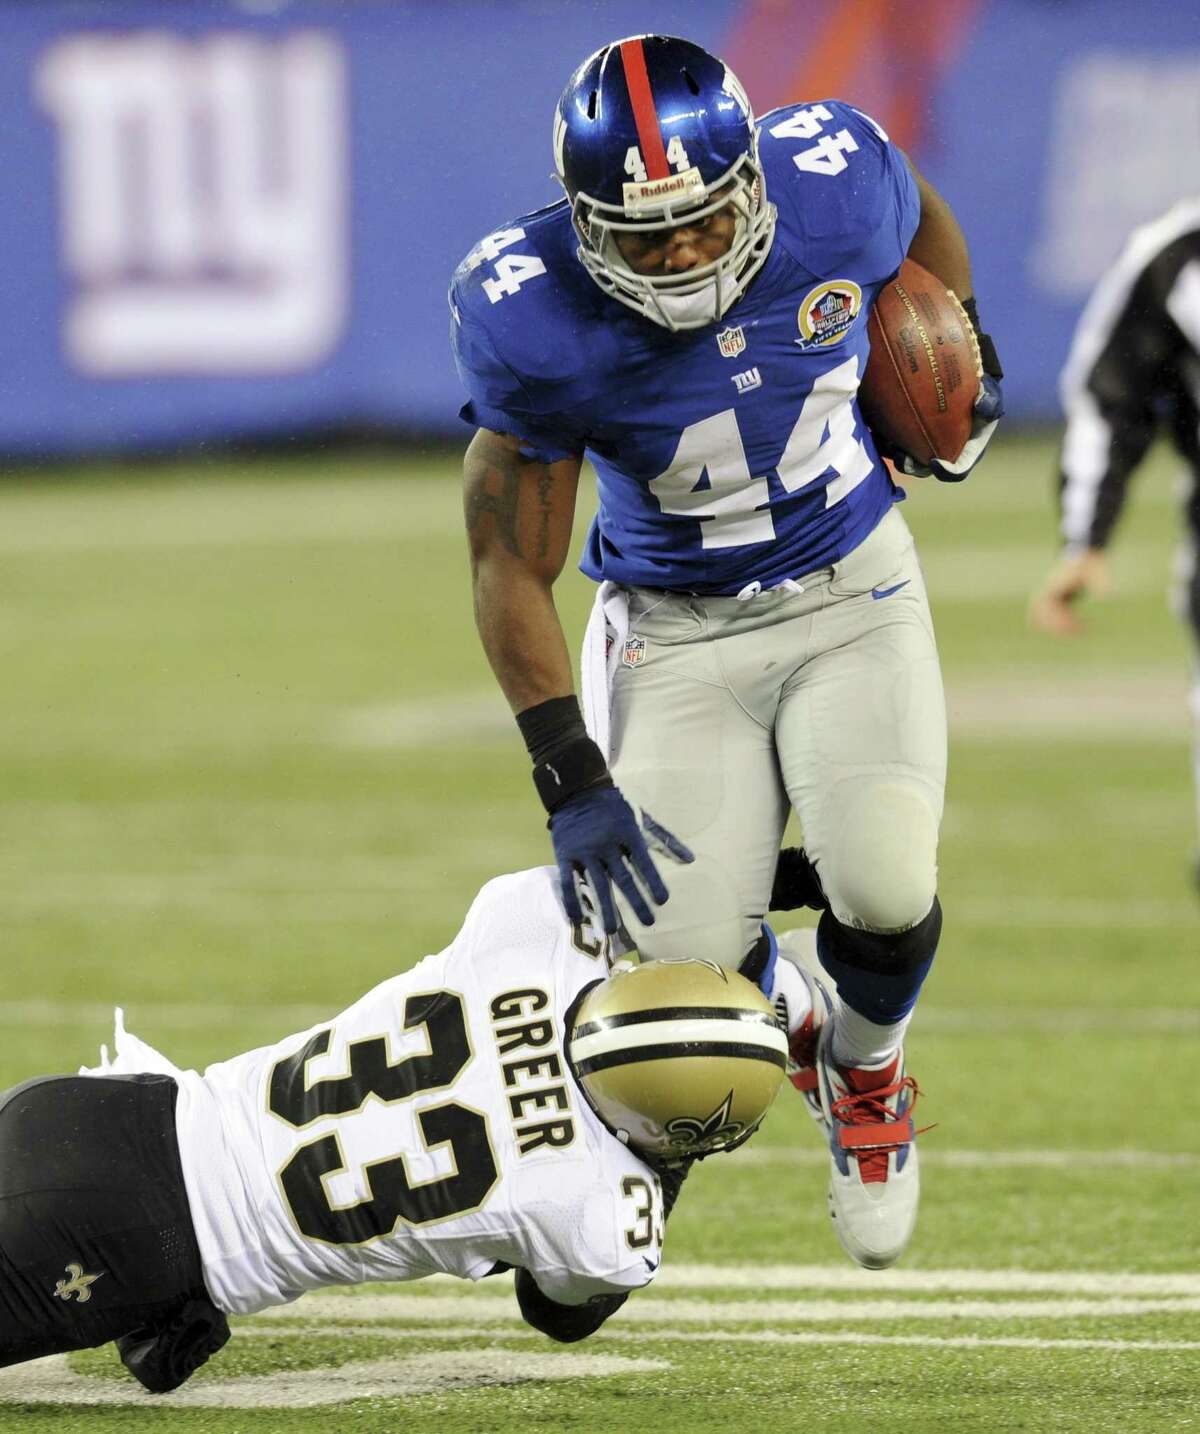 New Orleans Saints cornerback Jabari Greer (33) attempts to bring down New York Giants running back Ahmad Bradshaw (44) during the first half of an NFL football game Sunday, Dec. 9, 2012, in East Rutherford, N.J. (AP Photo/Bill Kostroun)